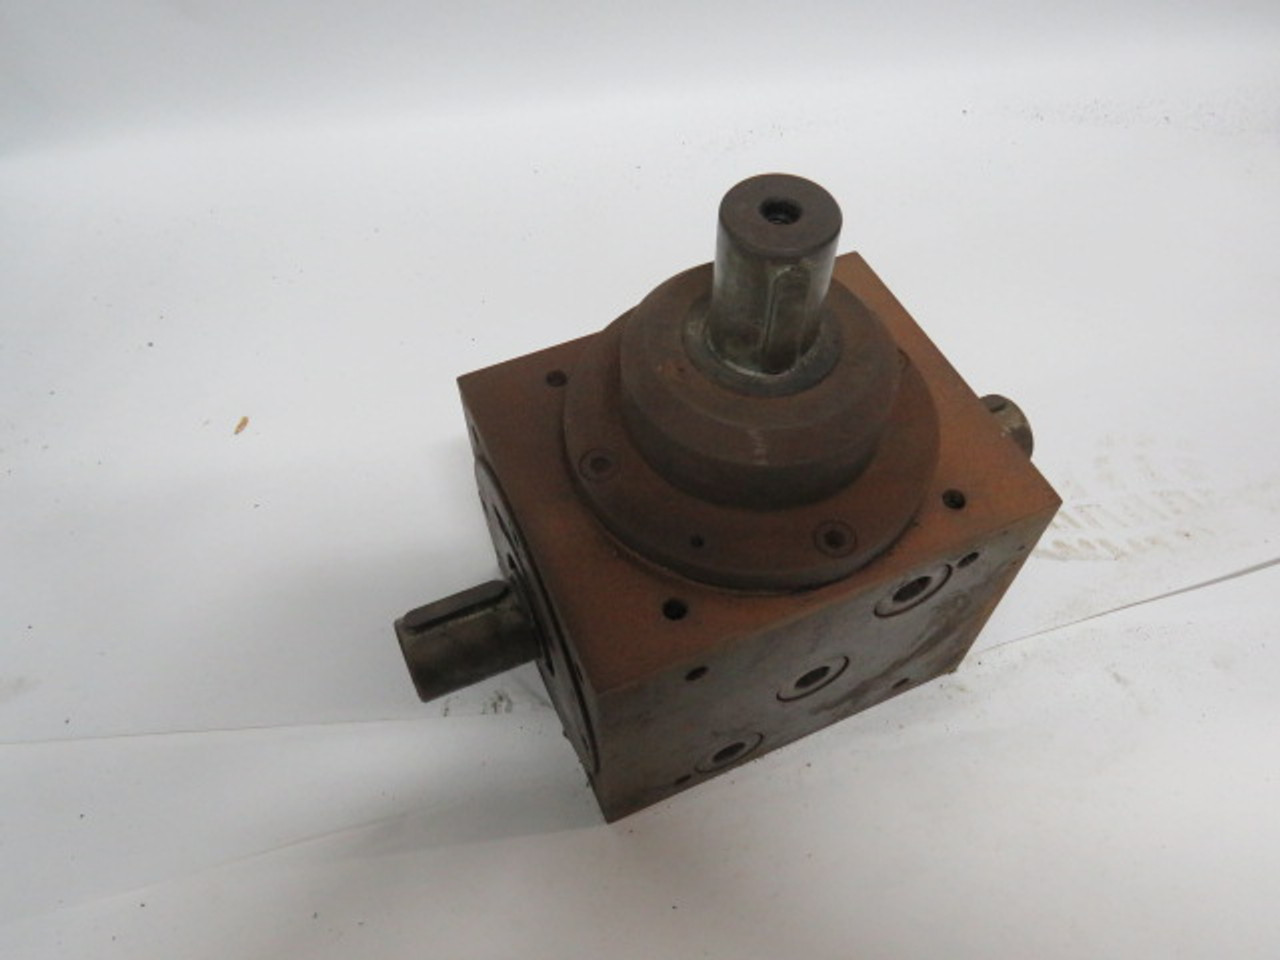 Tandler Bevel Gearbox Gear Reducer 11:9 Ratio 42mm Input 42mm Output USED